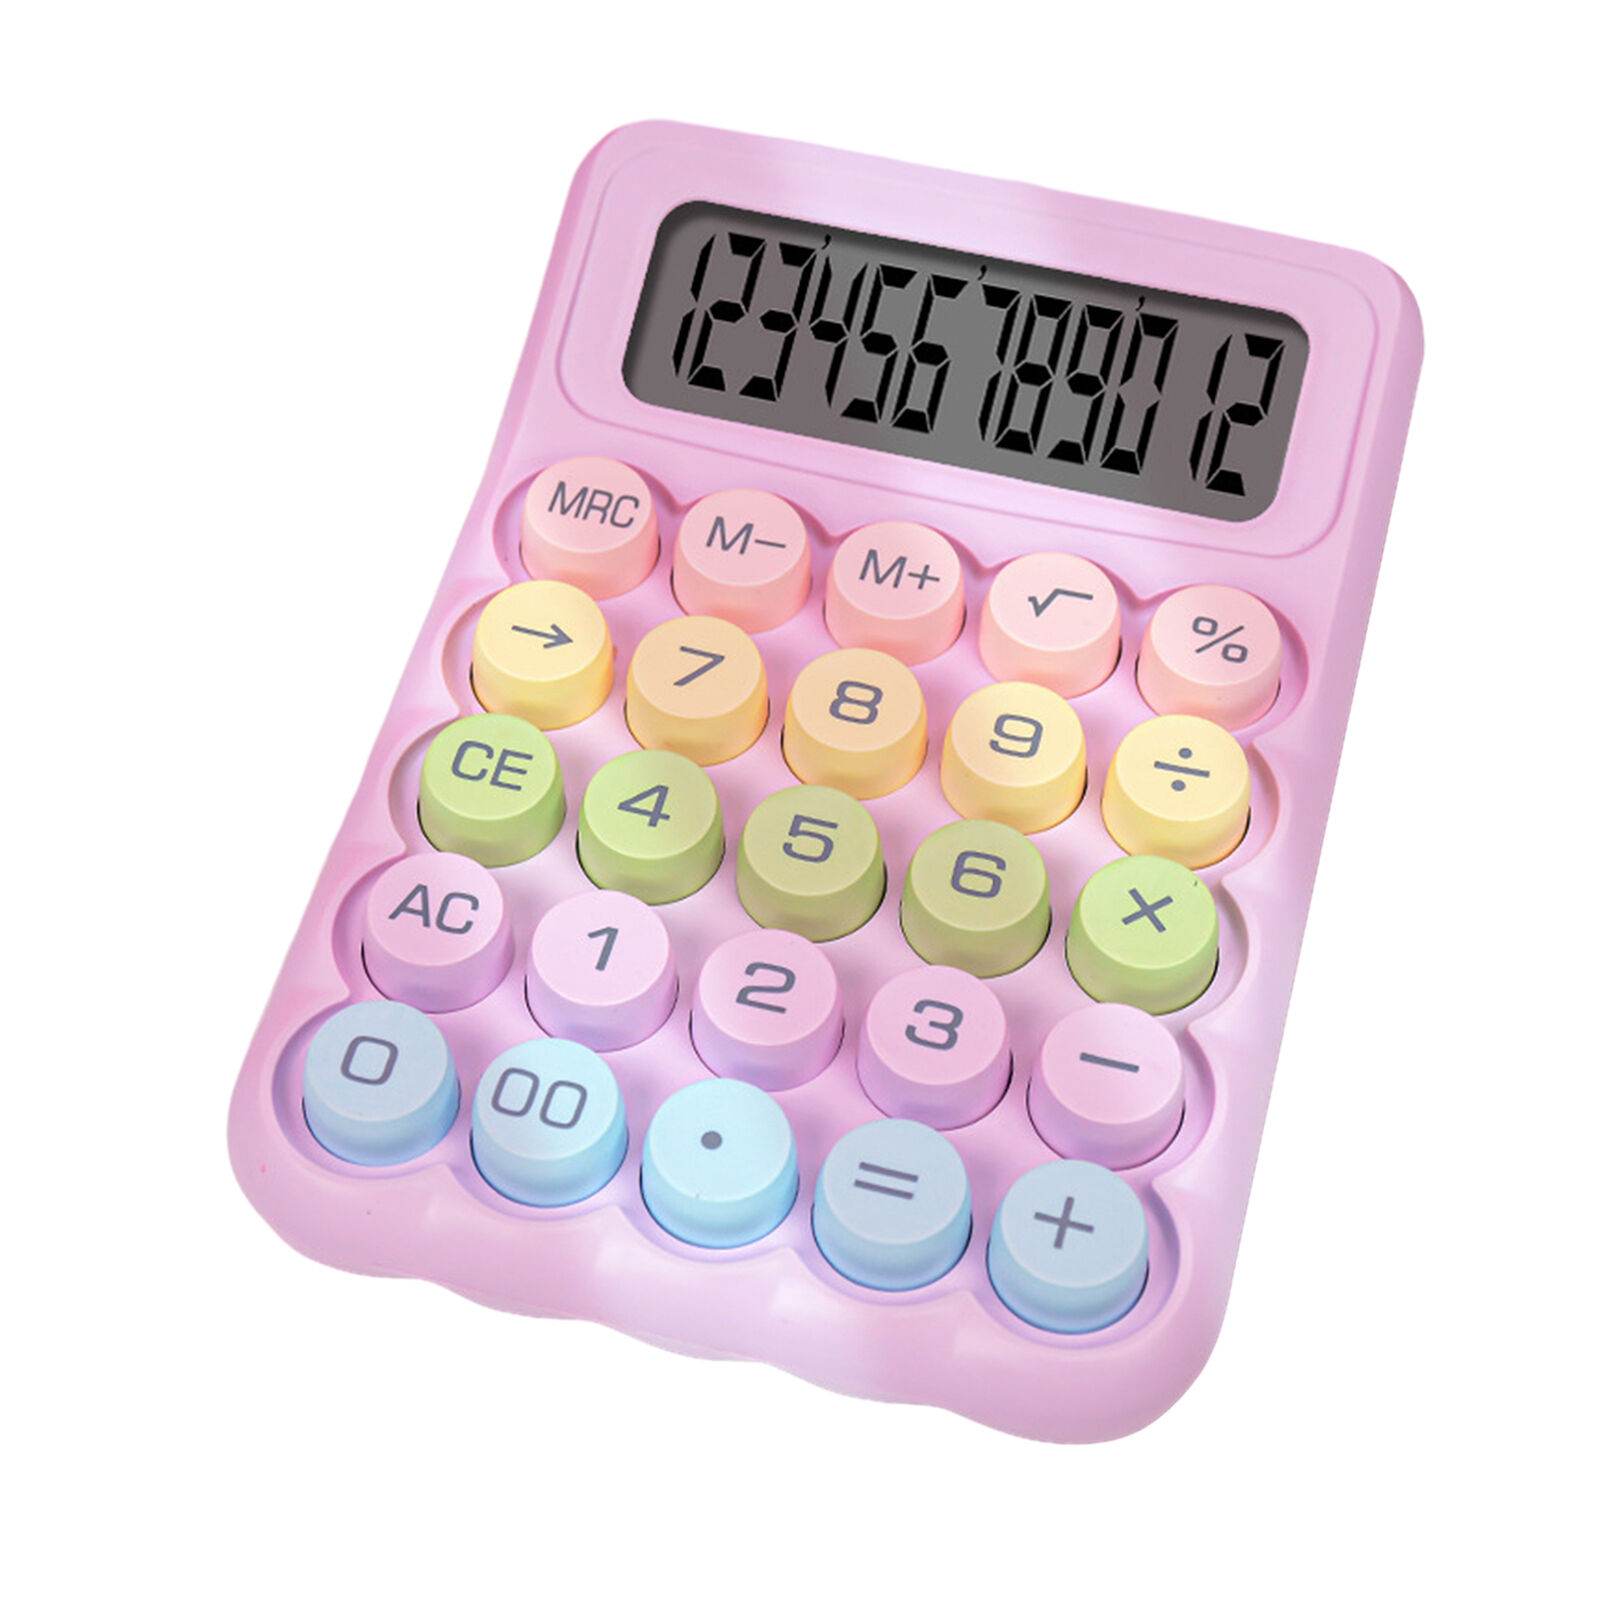 Extra Calculator Vintage Design Retro Round Key Mechanical with Lcd Display